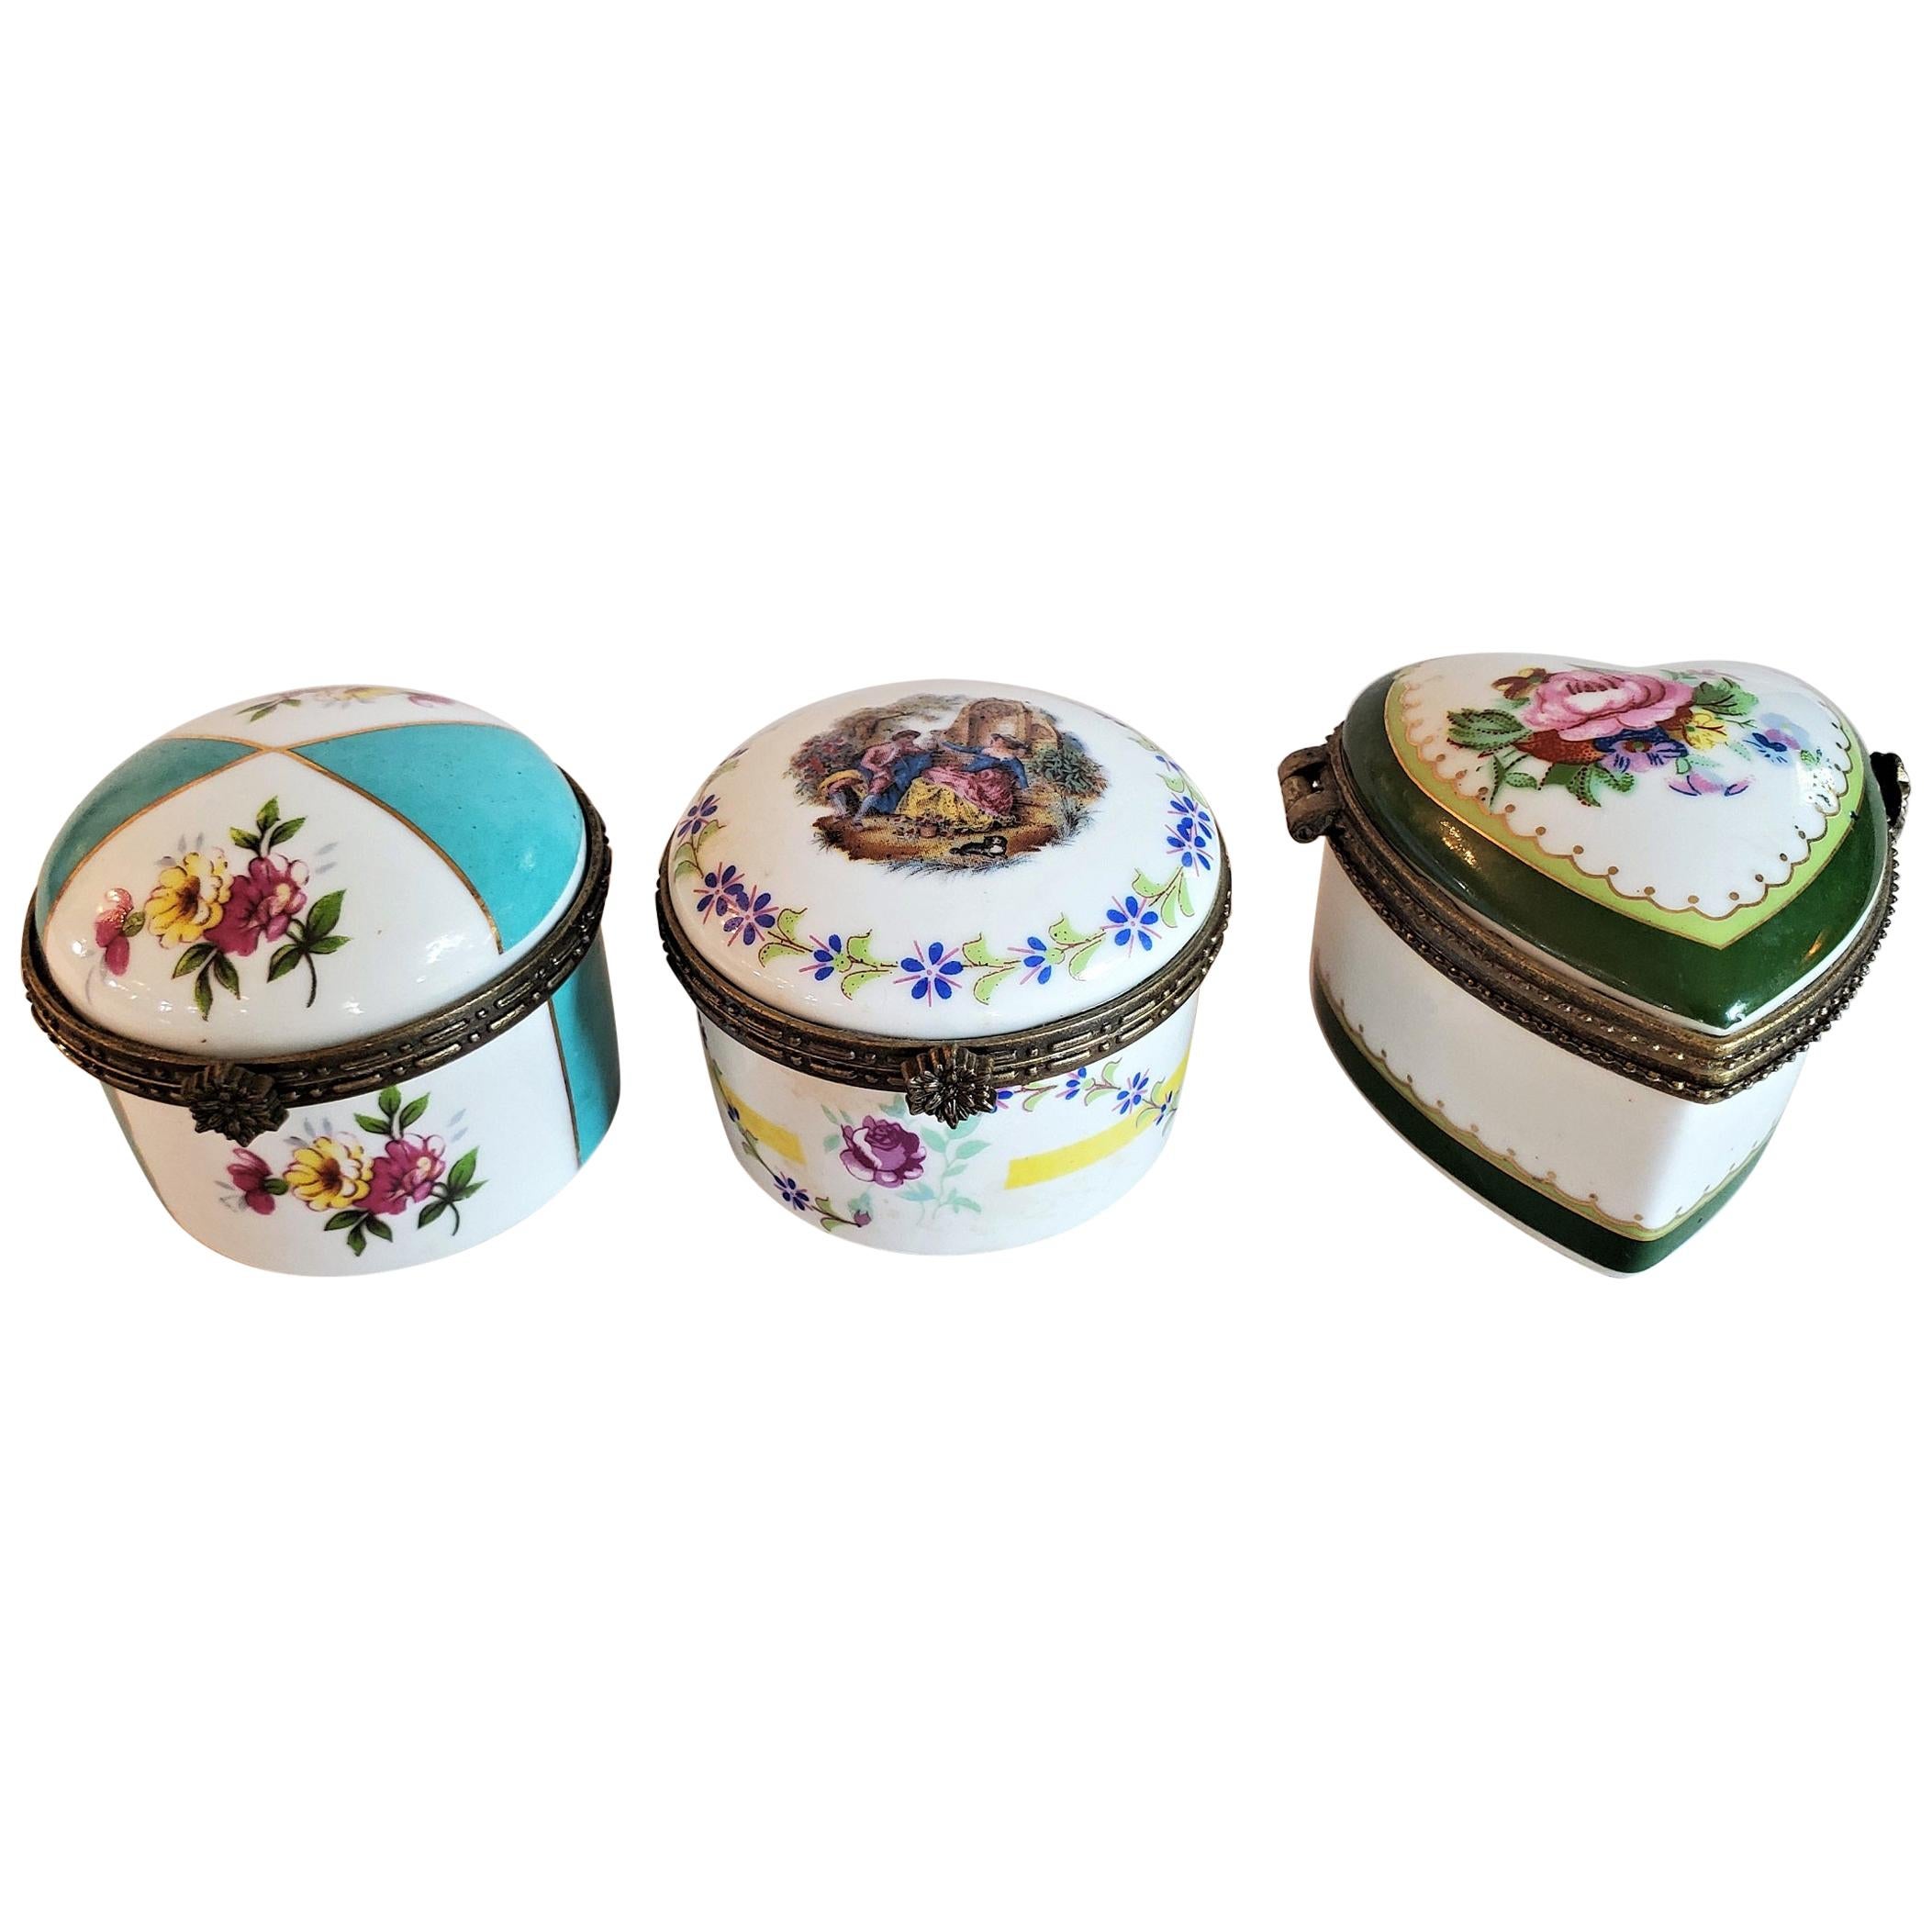 Set of 3 Limoges Style Ring or Snuff Boxes